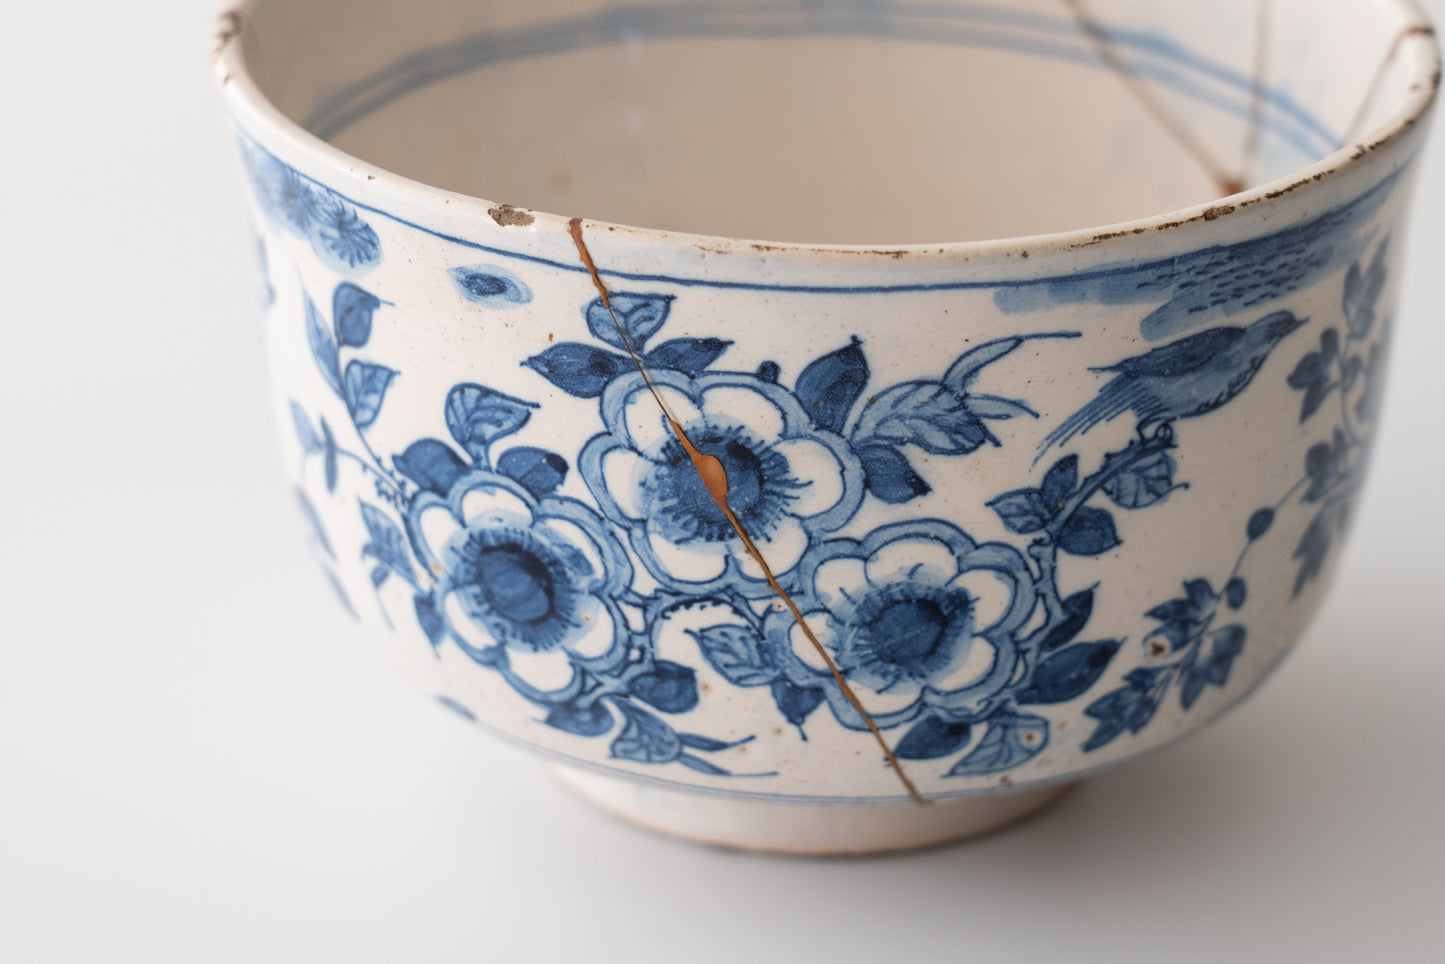 Bowl with bird and flower design